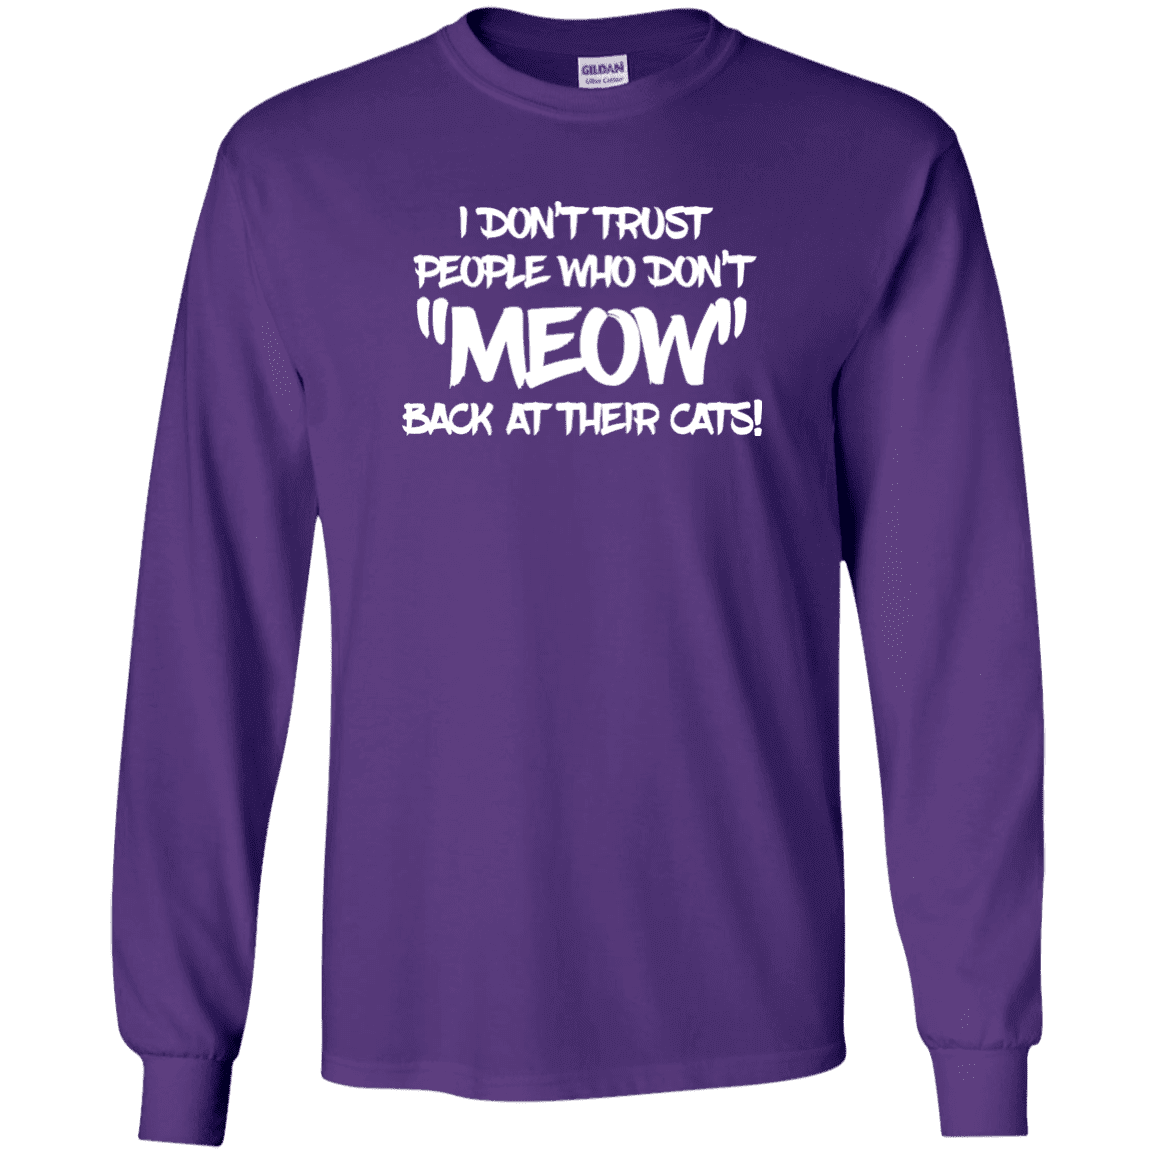 Don't Trust Don't Meow - Long Sleeve T Shirt.